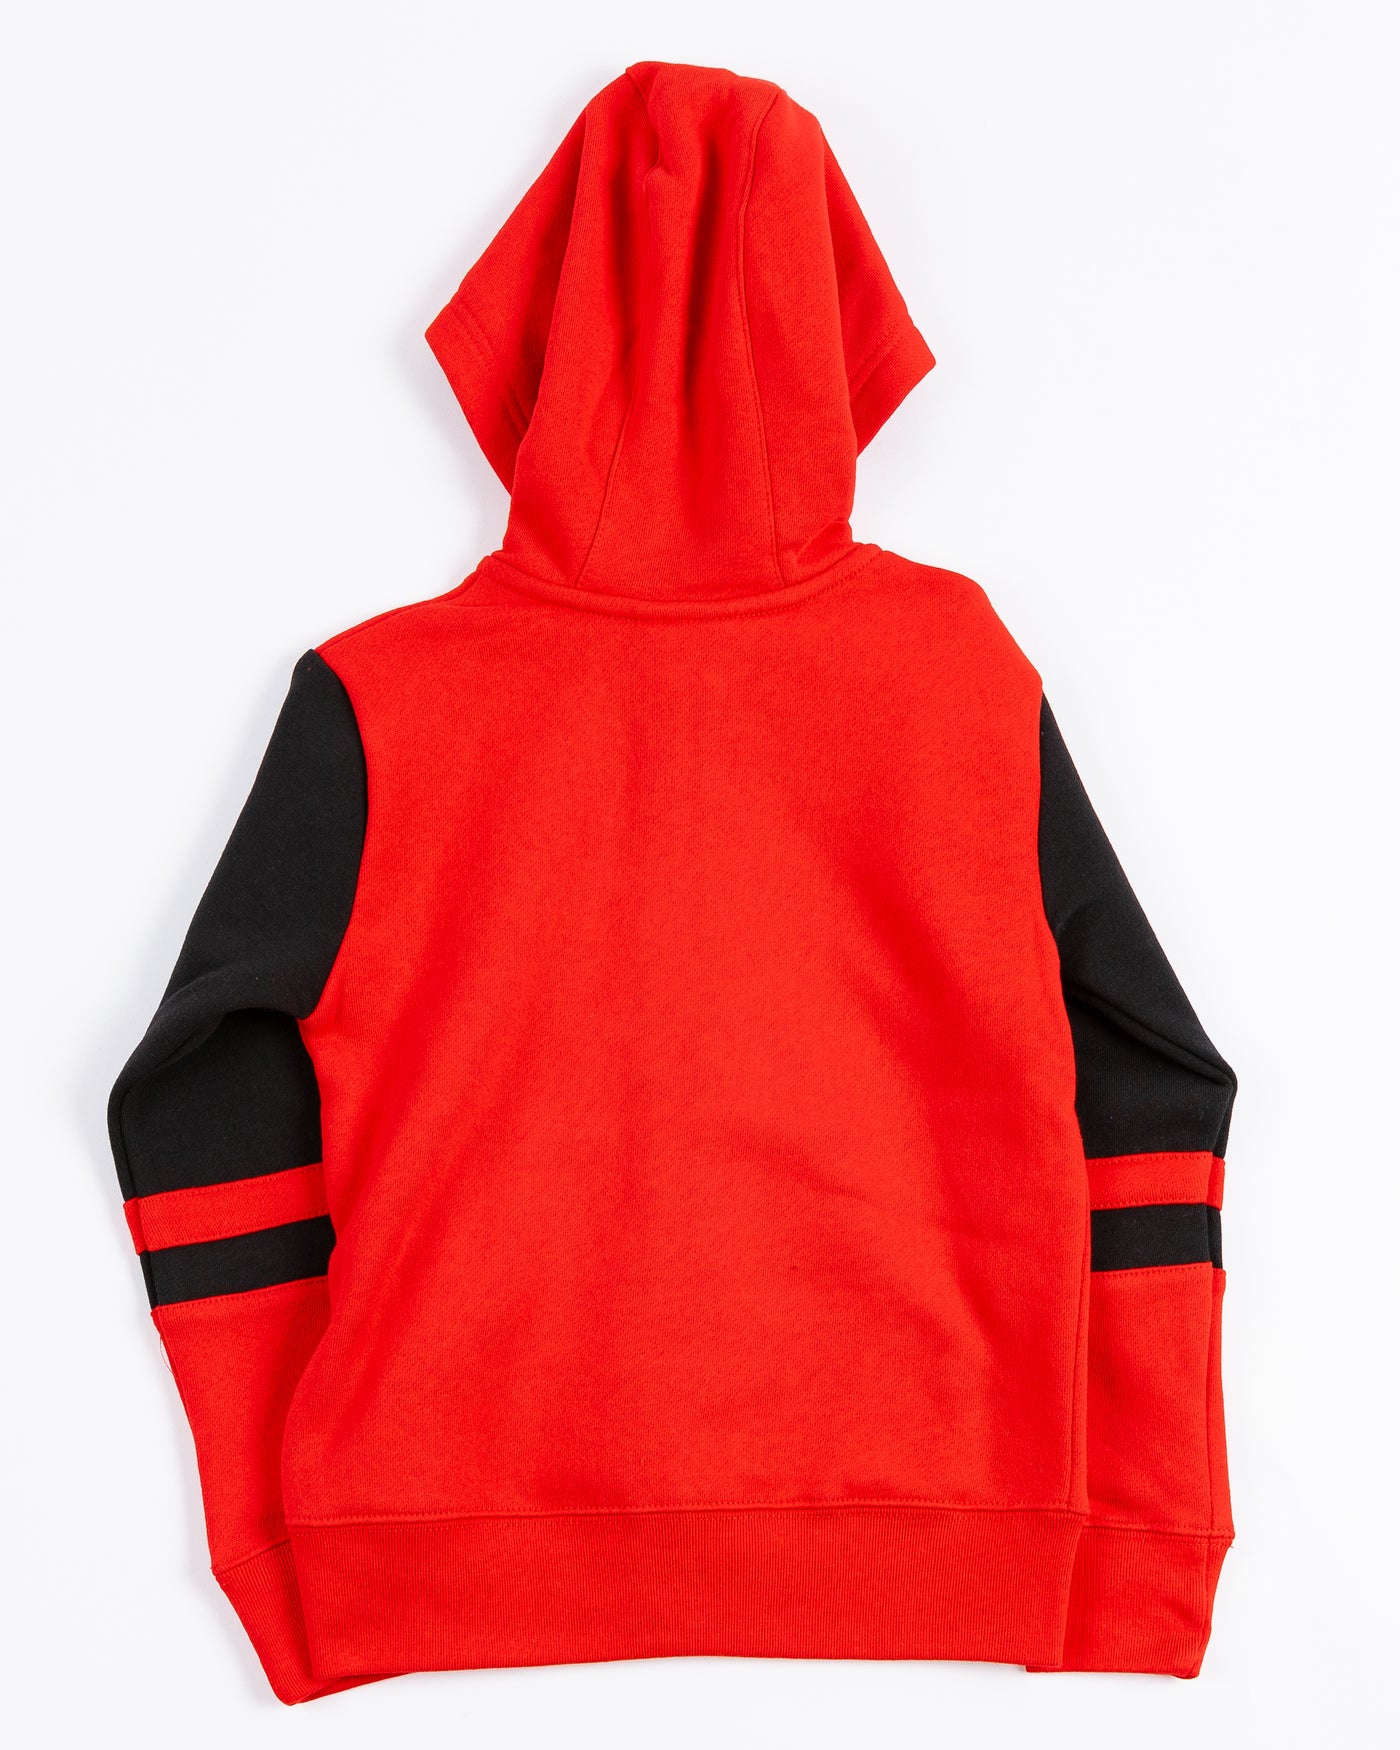 youth Champion zip up hoodie with red and black color block design and Chicago Blackhawks primary logos on left chest and right sleeve - back lay flat